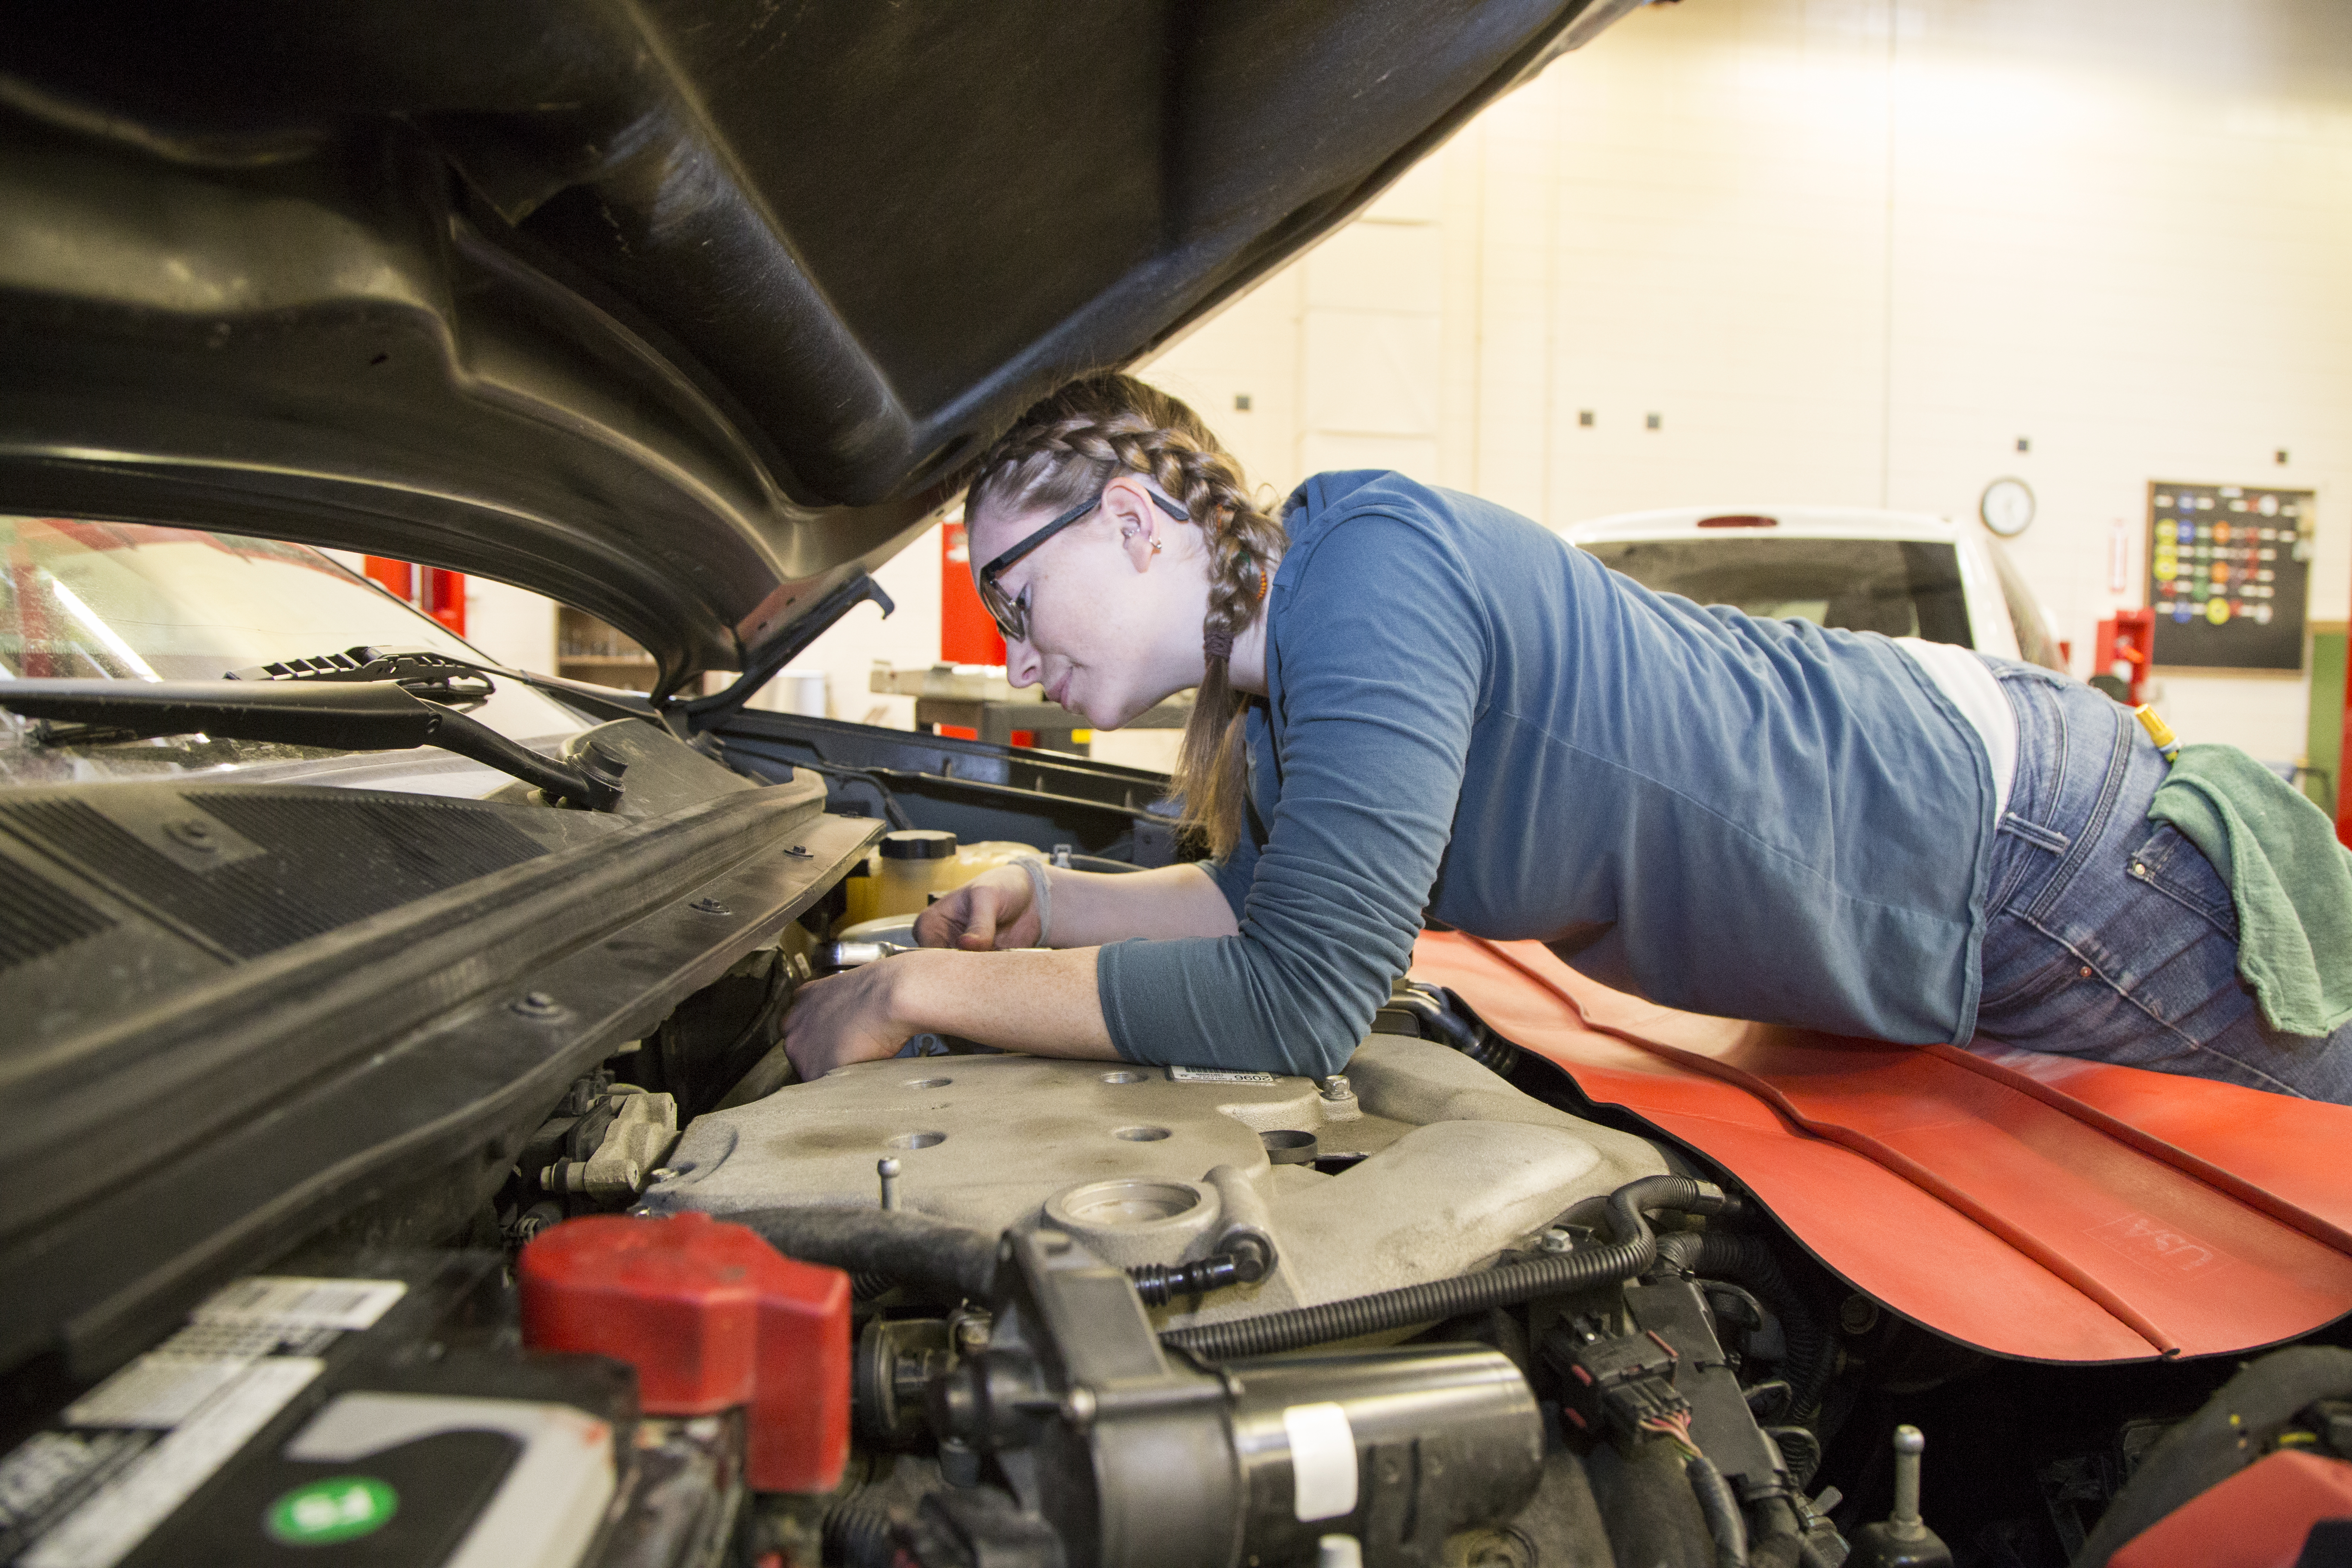 A woman works under the hood of a car